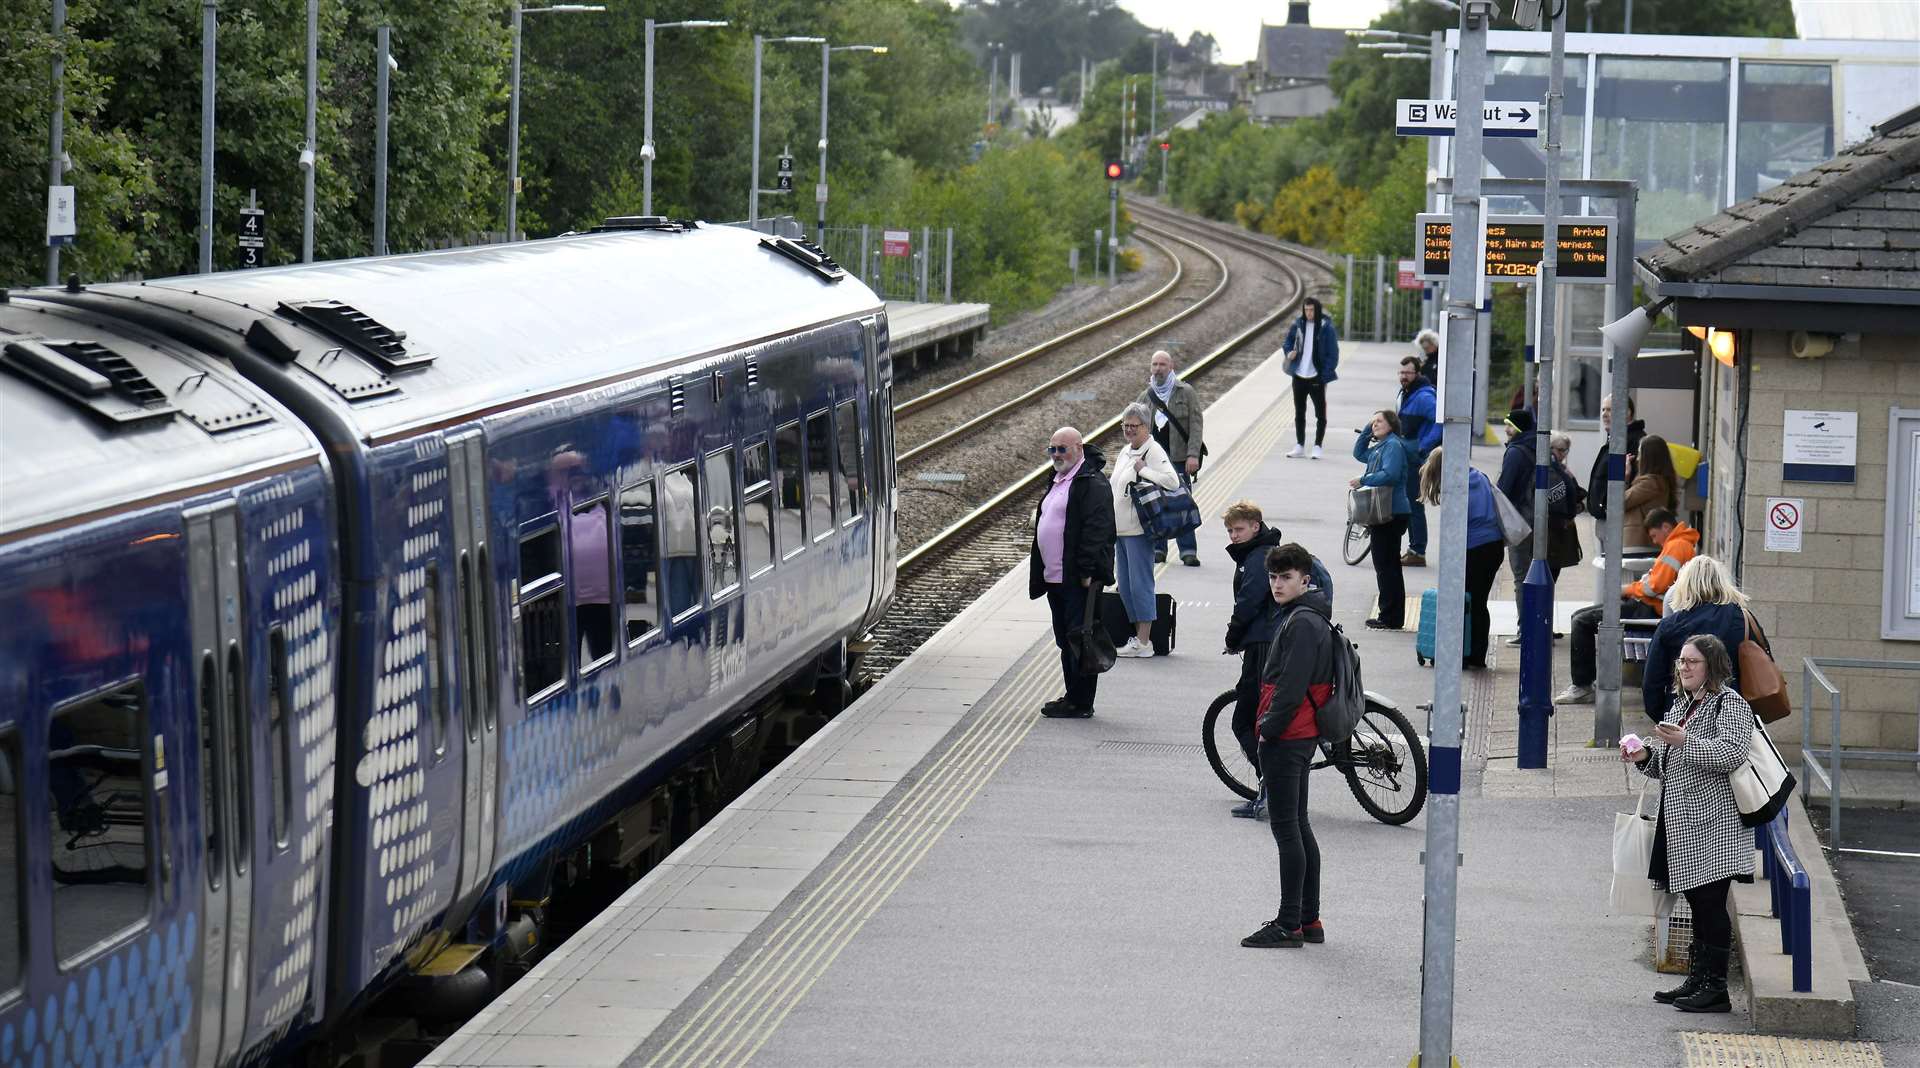 Elgin station will be quiet on the three days of strike action.